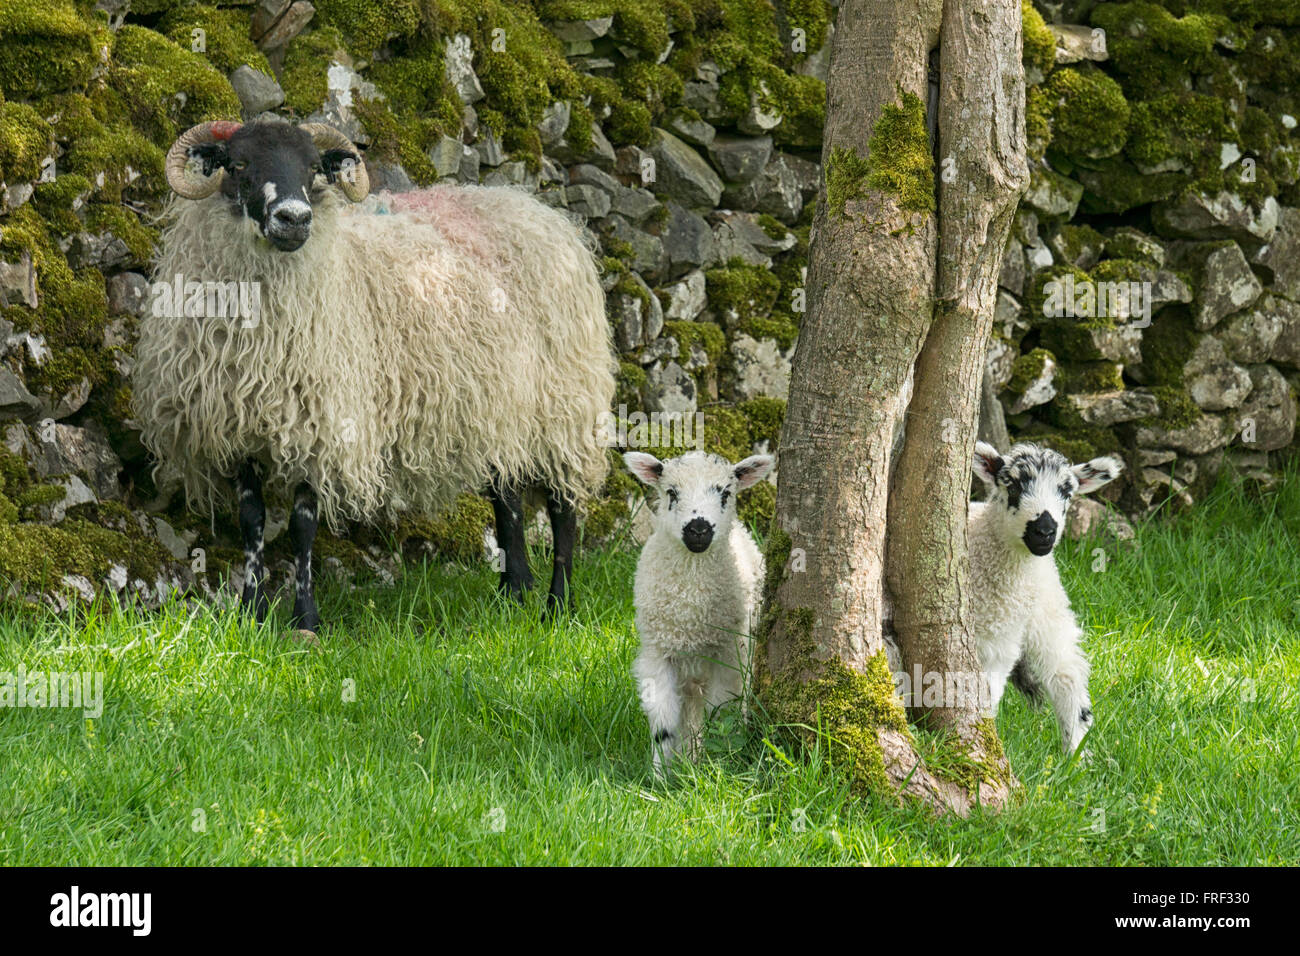 Peek-a-boo. Ewe with spring lambs in the Yorkshire Dales at Kettlewell. England, UK Stock Photo